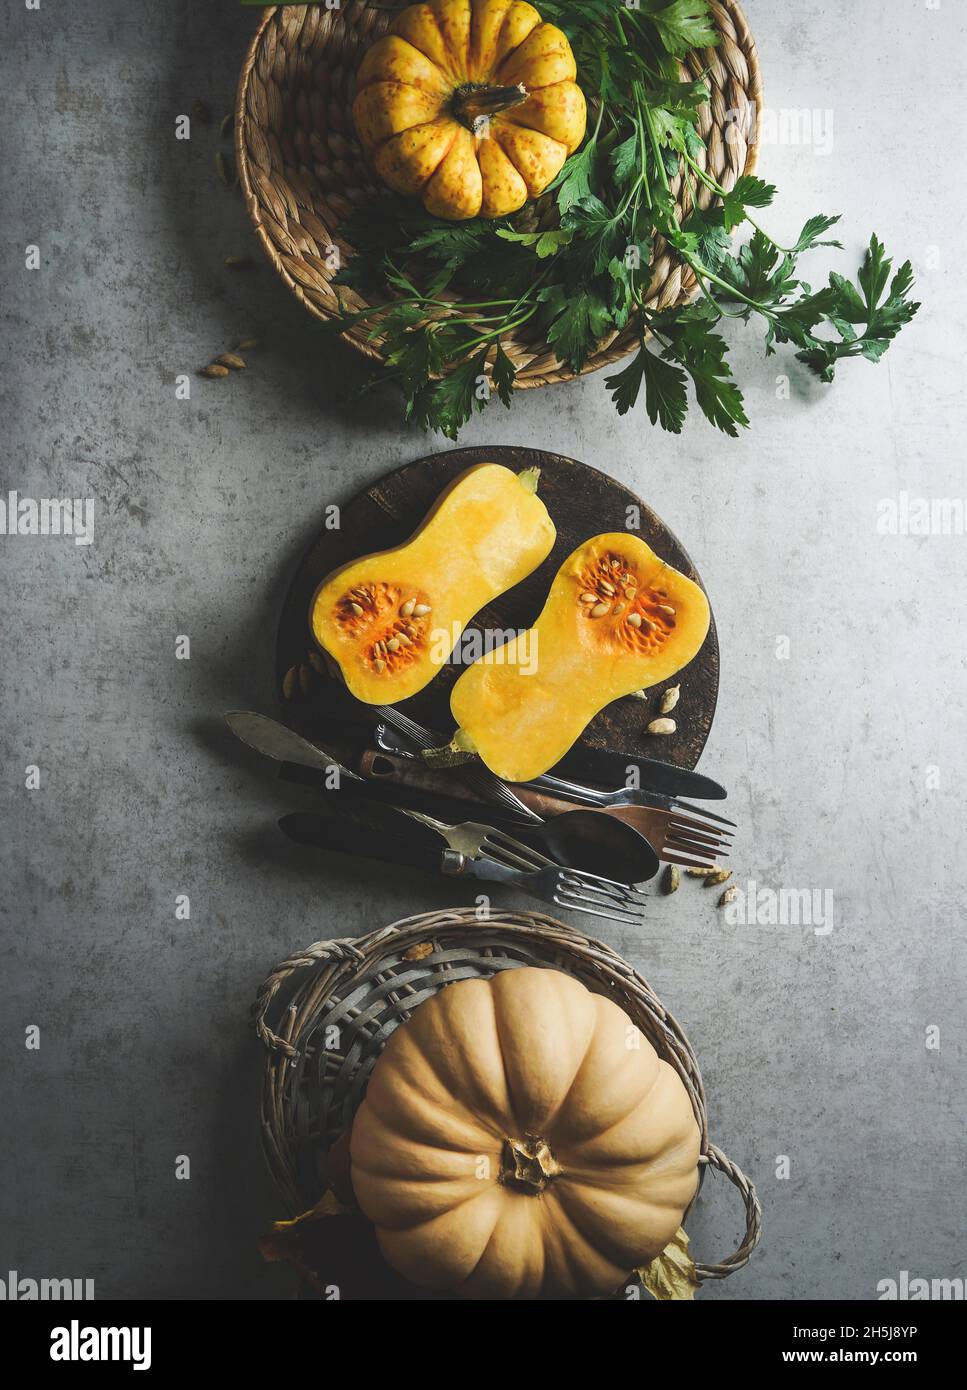 Halve of butternut squash on pale grey kitchen table with millet in bowl and kitchen utensils. Preparing healthy vegan millet porridge at home with se Stock Photo